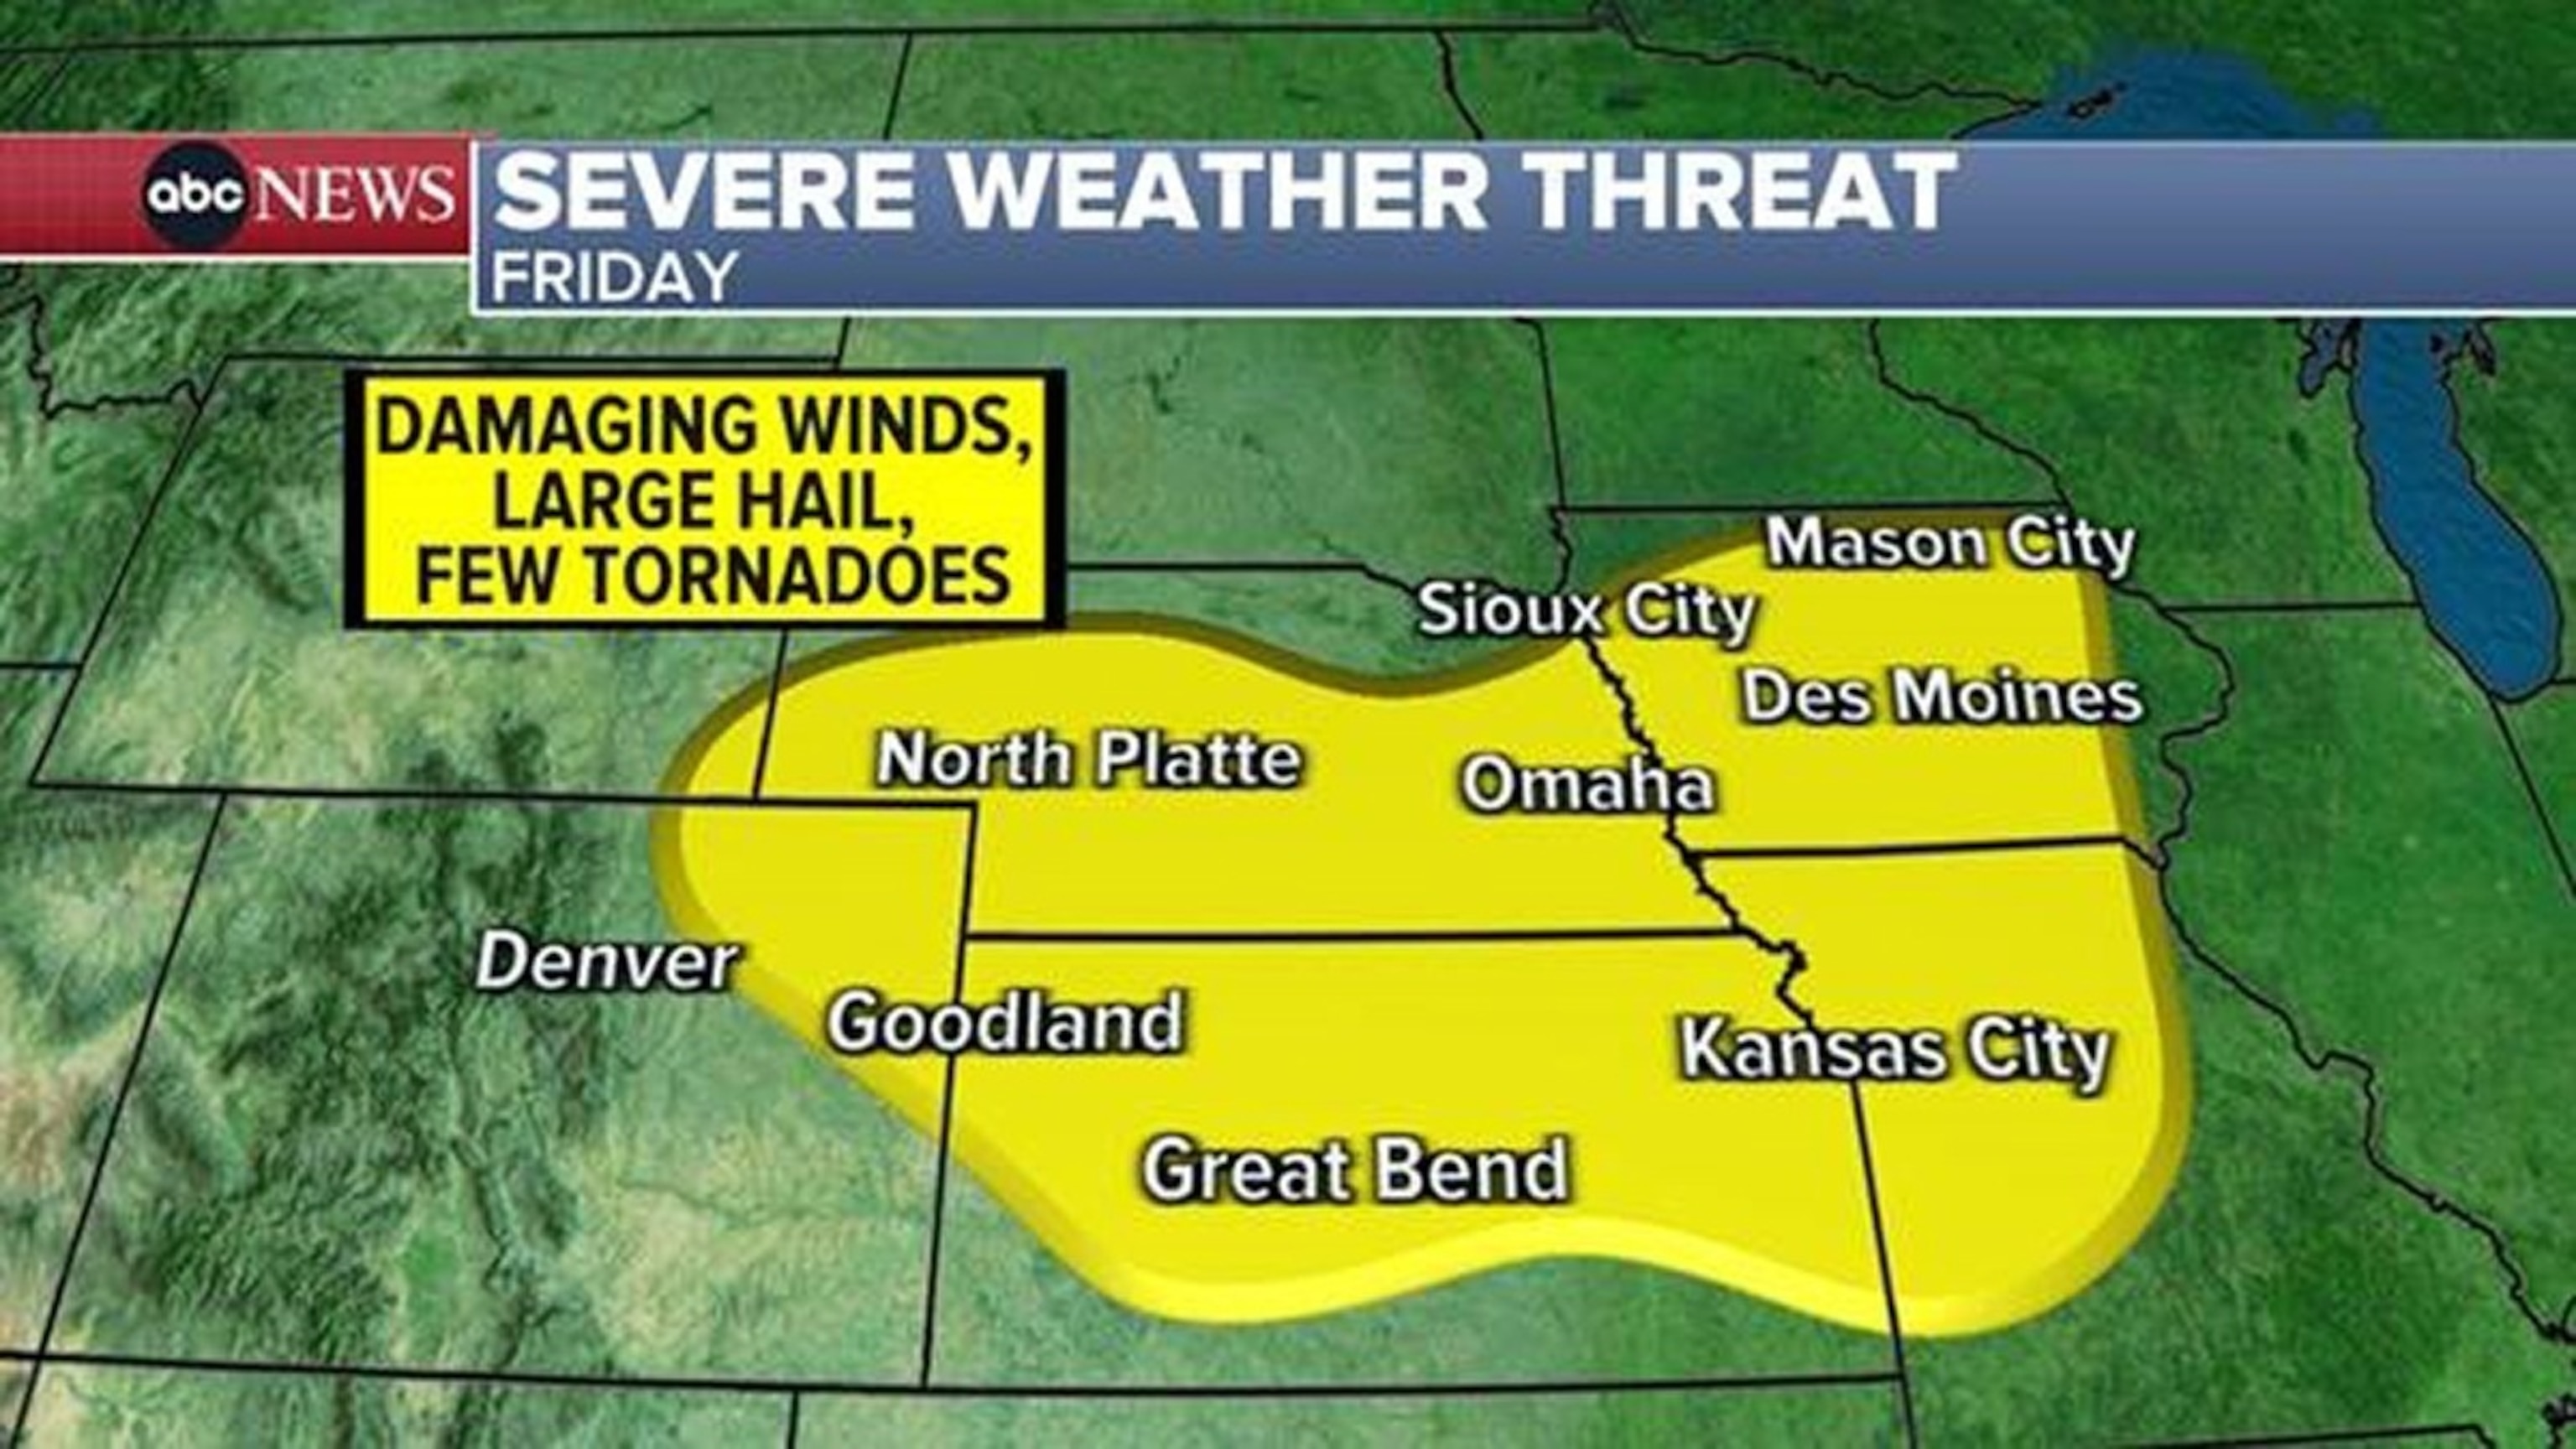 PHOTO: Severe weather threat Friday.